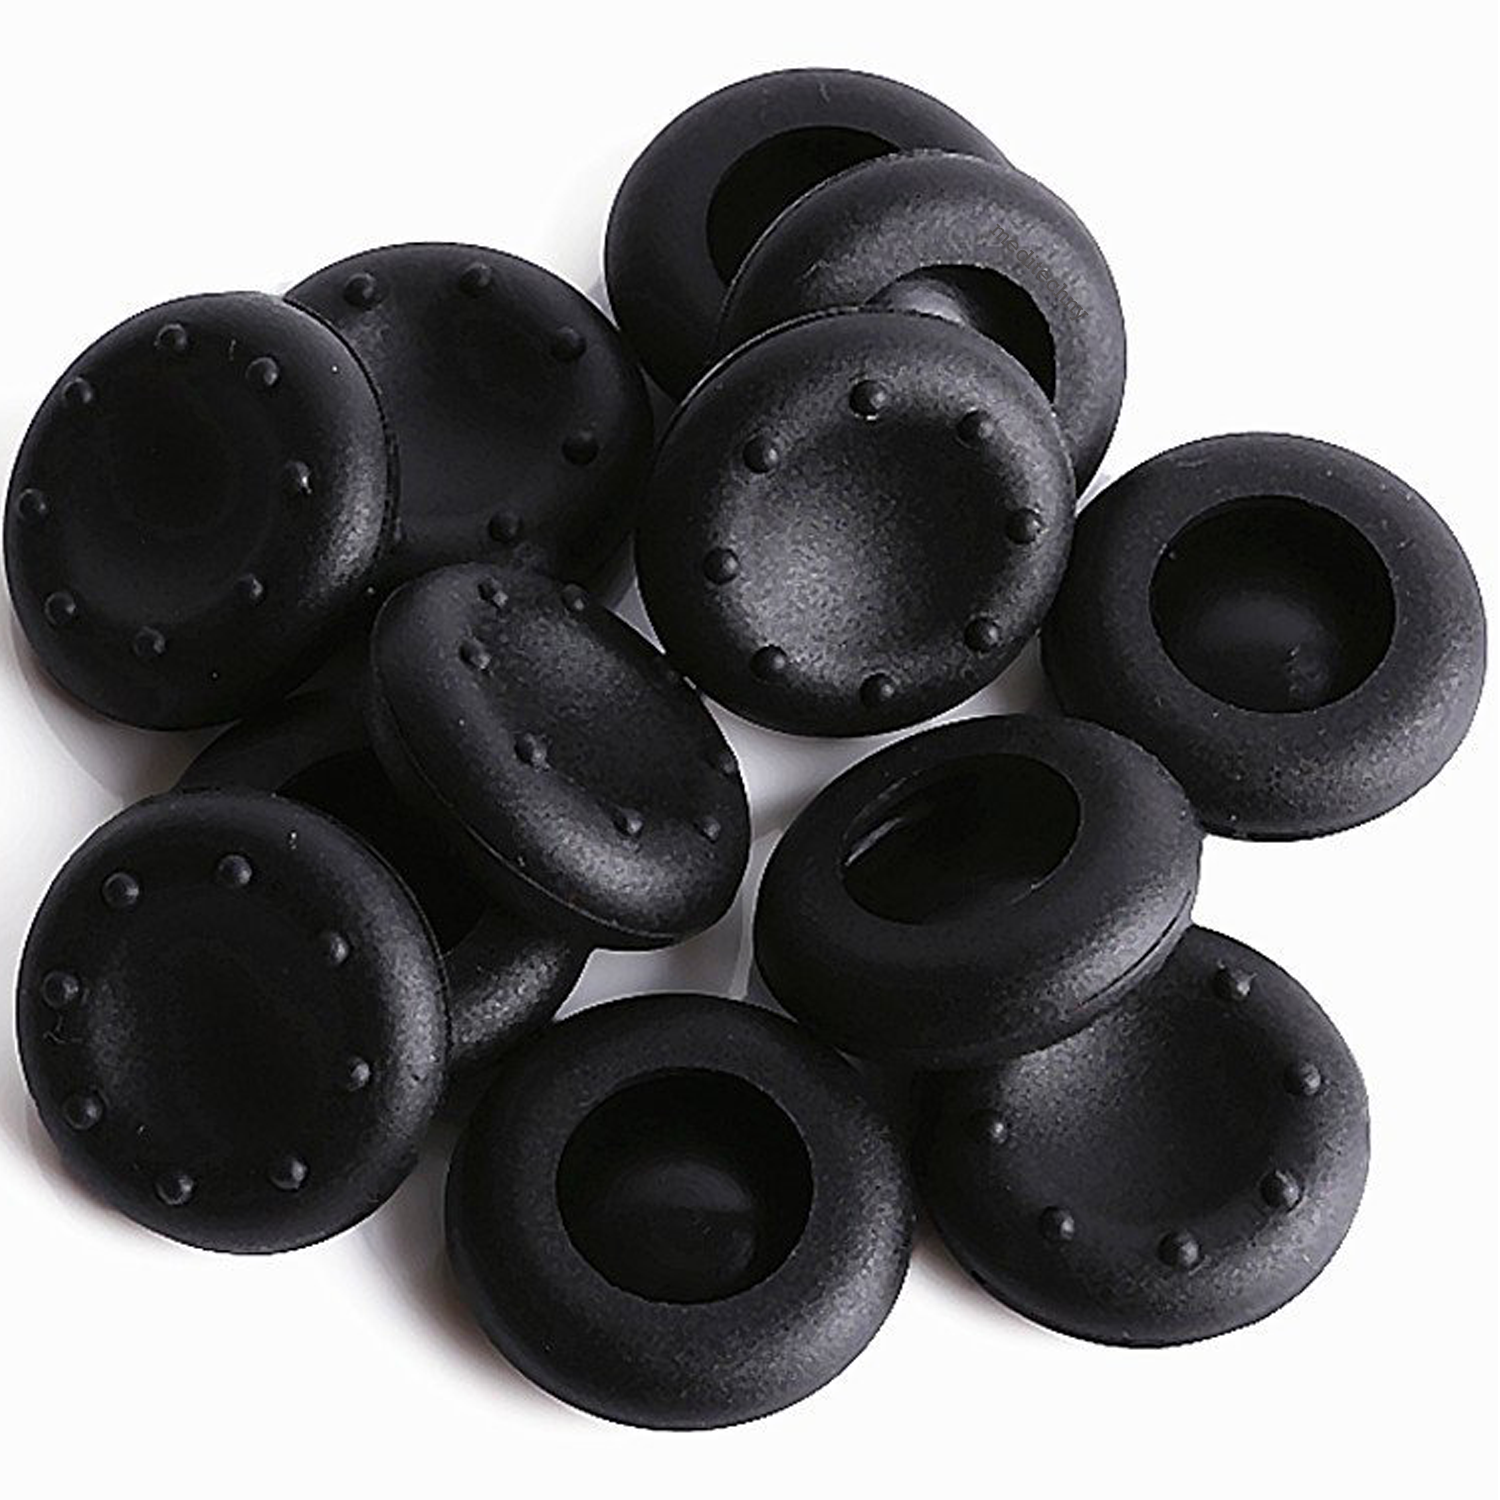 10x Black Thumbstick Grips Cap Cover Thumb Stick Grip for Xbox 360 PS3 PS4 Wii Unbranded/Generic PS4 PS3 - фотография #2